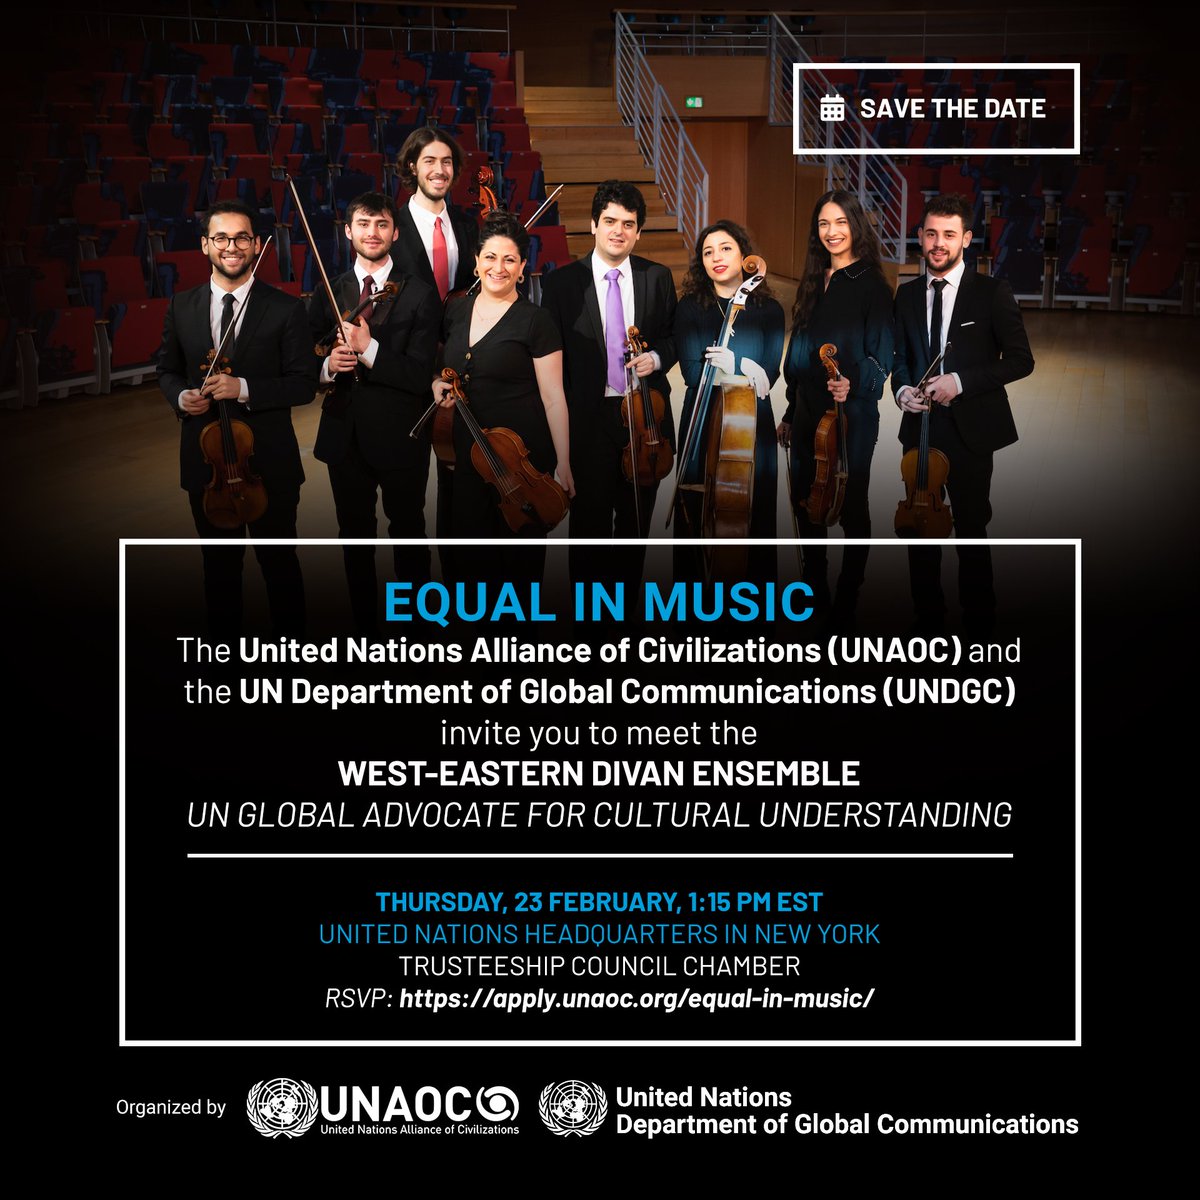 🎶 Join us for “Equal in Music: The West-Eastern Divan Ensemble”, co-organized by #UNAOC & the @UN Department of Global Communications 🗓 Thursday, 23 Feb, 1:15pm EST 📍 Trusteeship Council, UNHQ, New York 👉 Register: apply.unaoc.org/equal-in-music/ (UN Grounds Pass holders only)